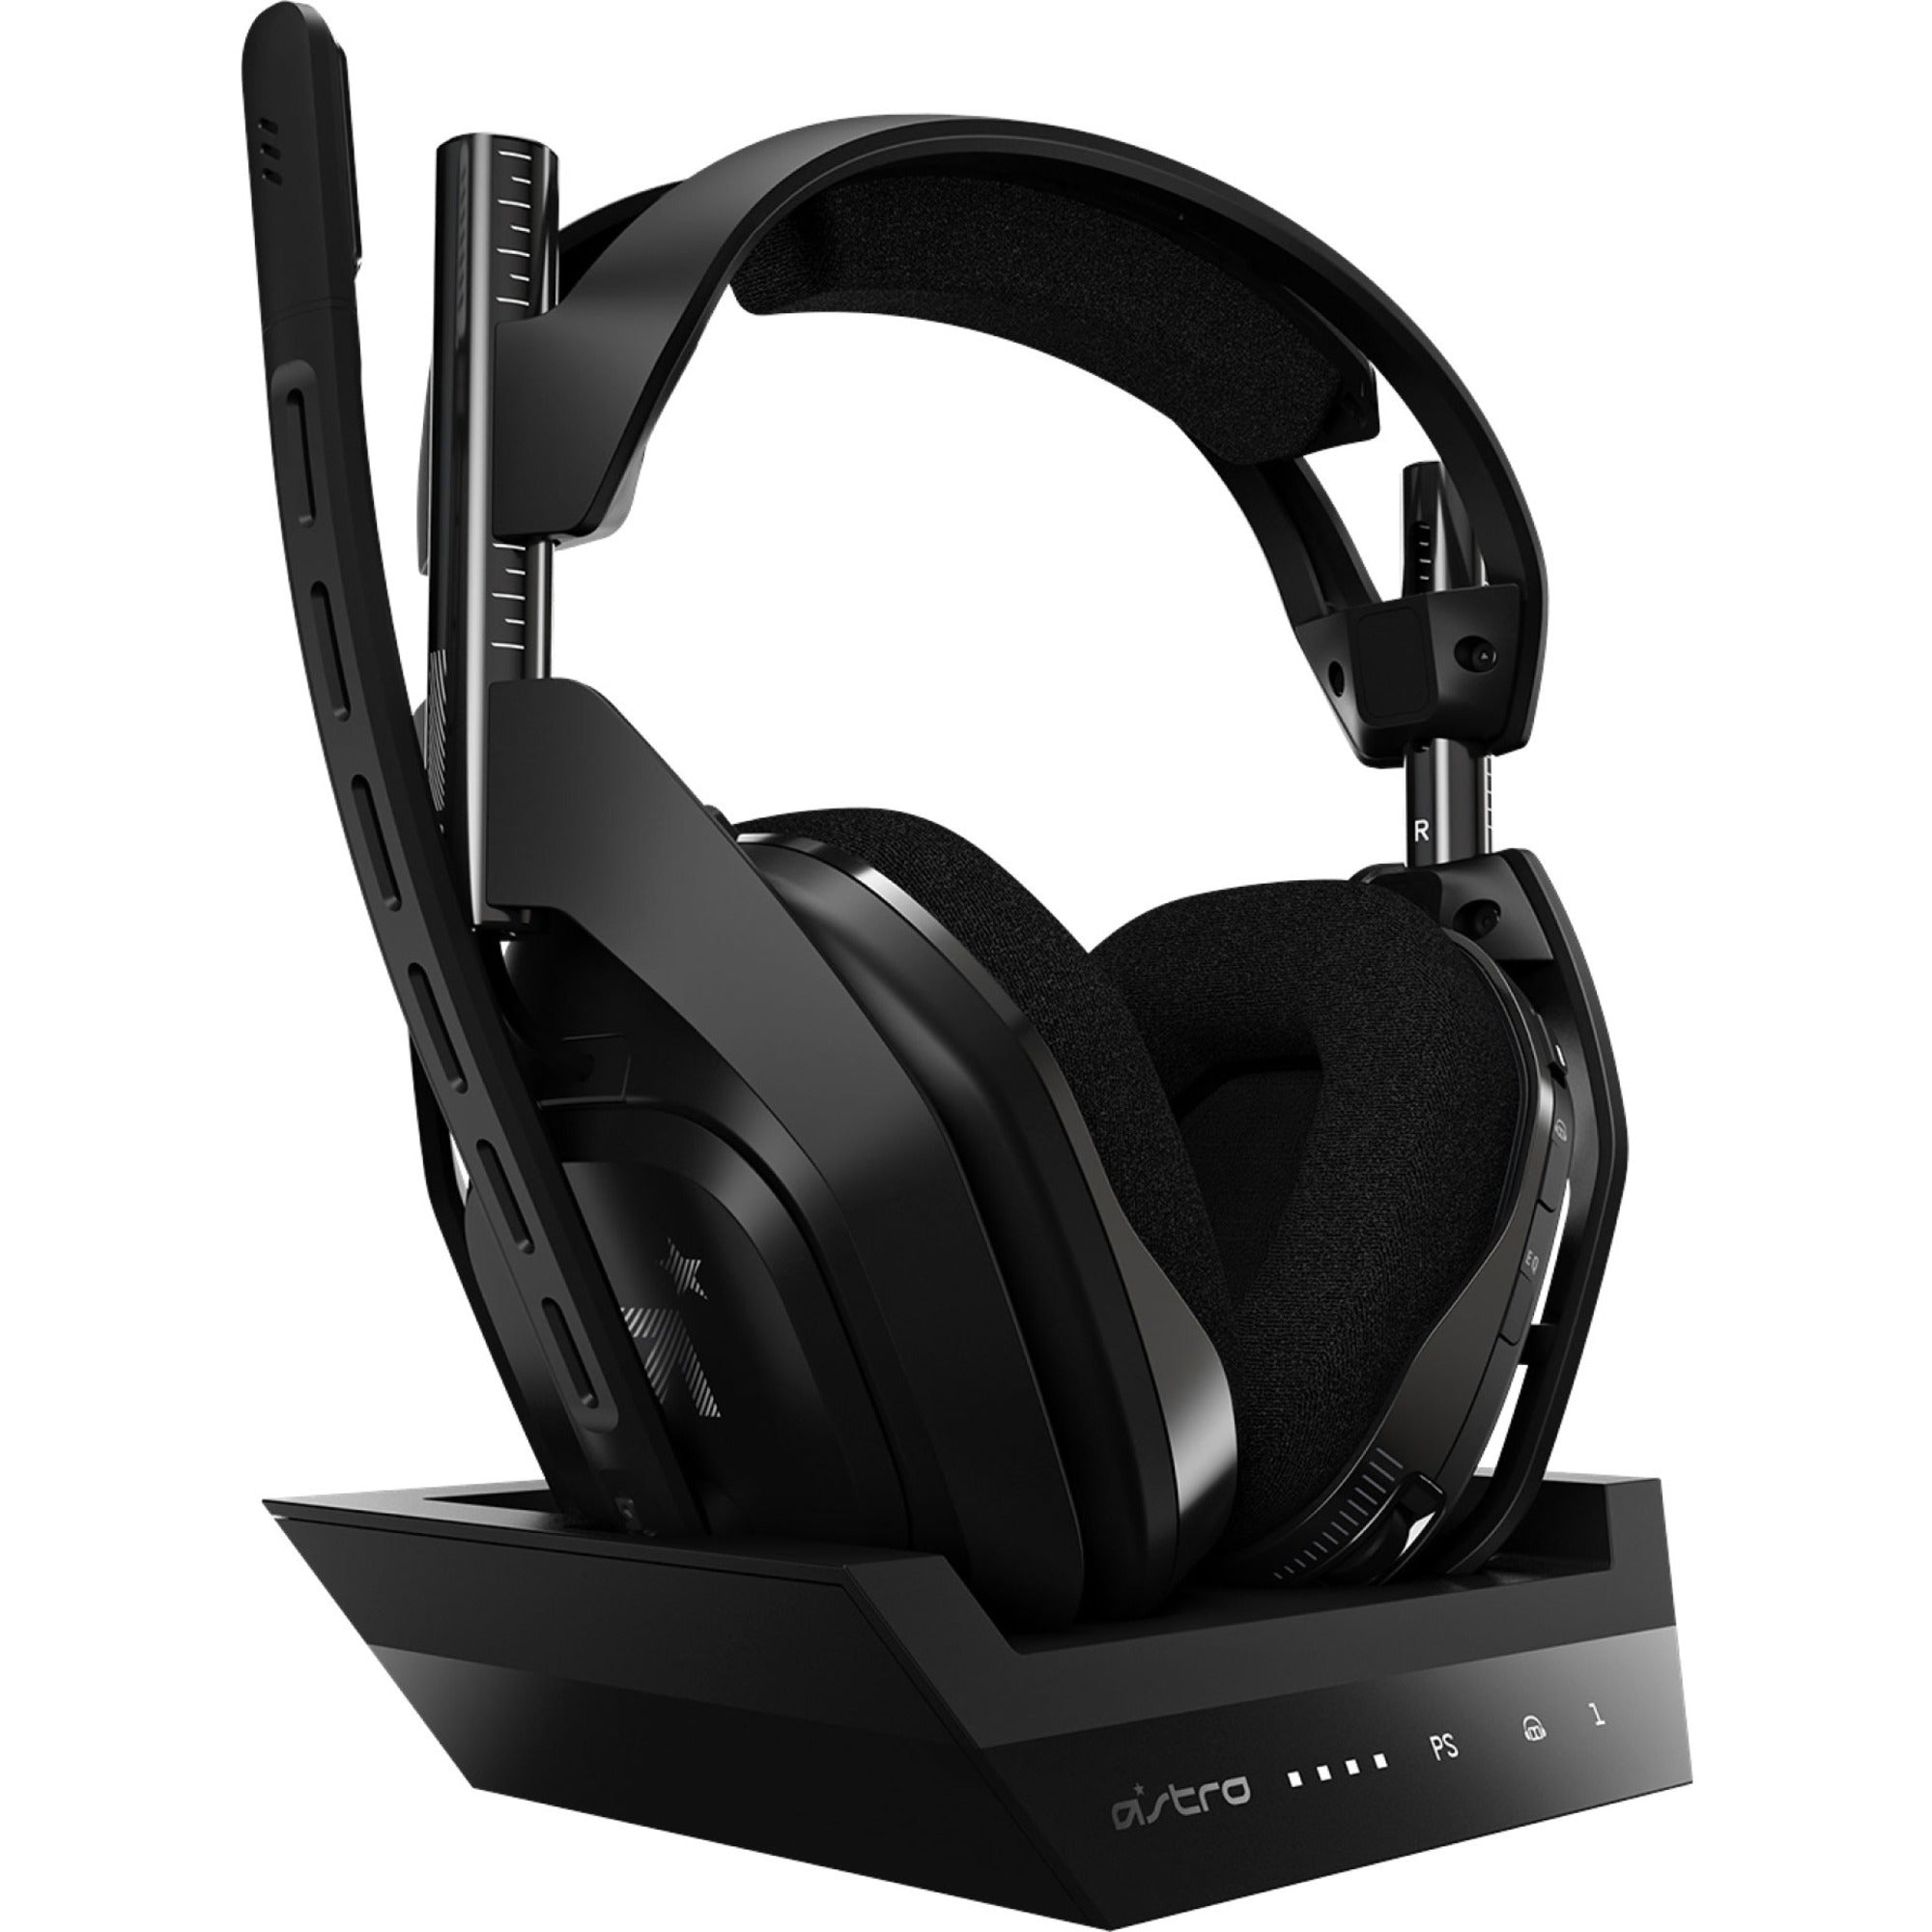 Astro A50 Wireless Headset with Lithium-Ion Battery - 939-001673